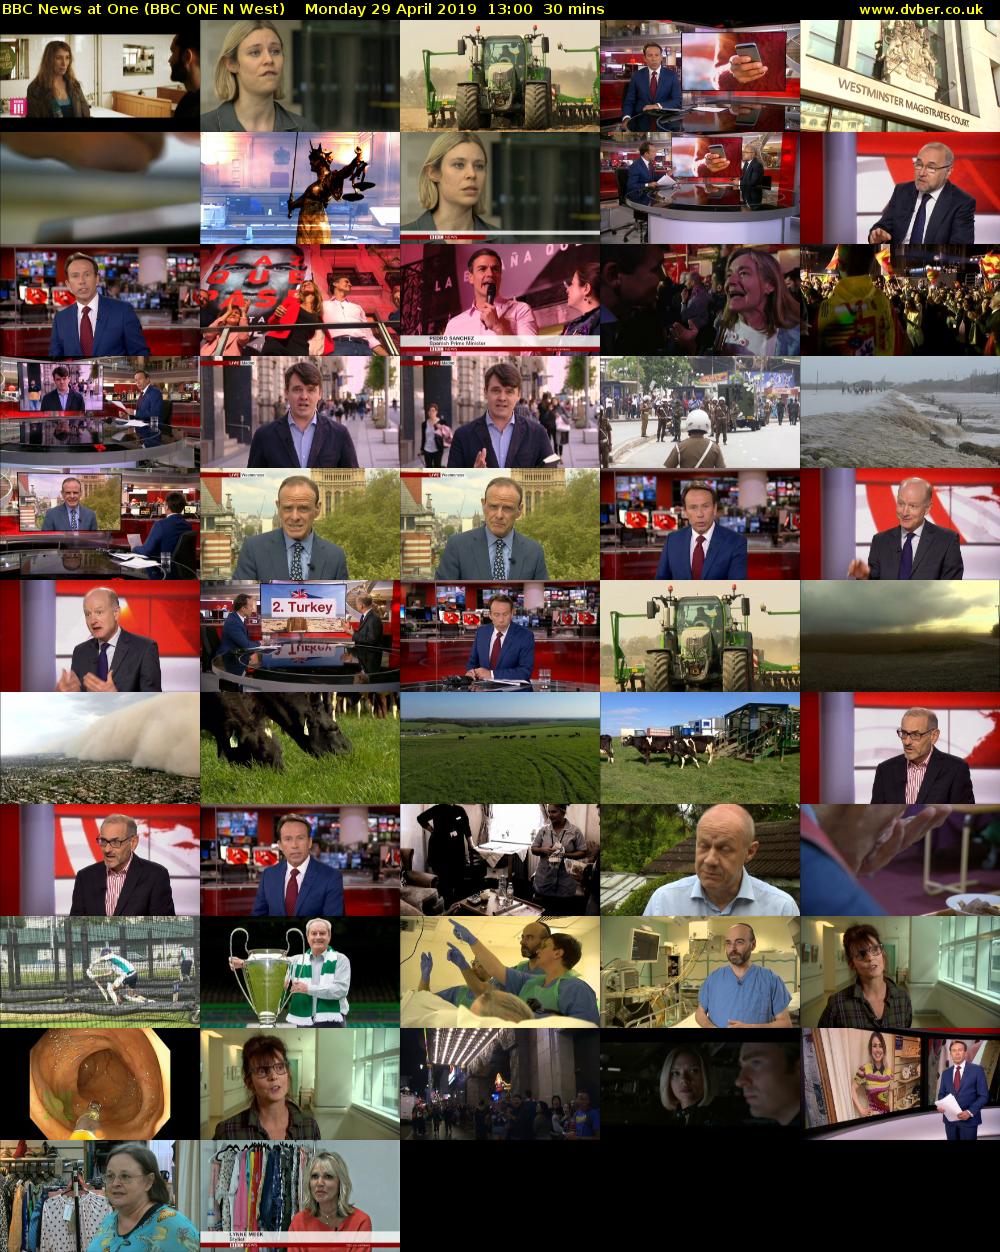 BBC News at One (BBC ONE N West) Monday 29 April 2019 13:00 - 13:30